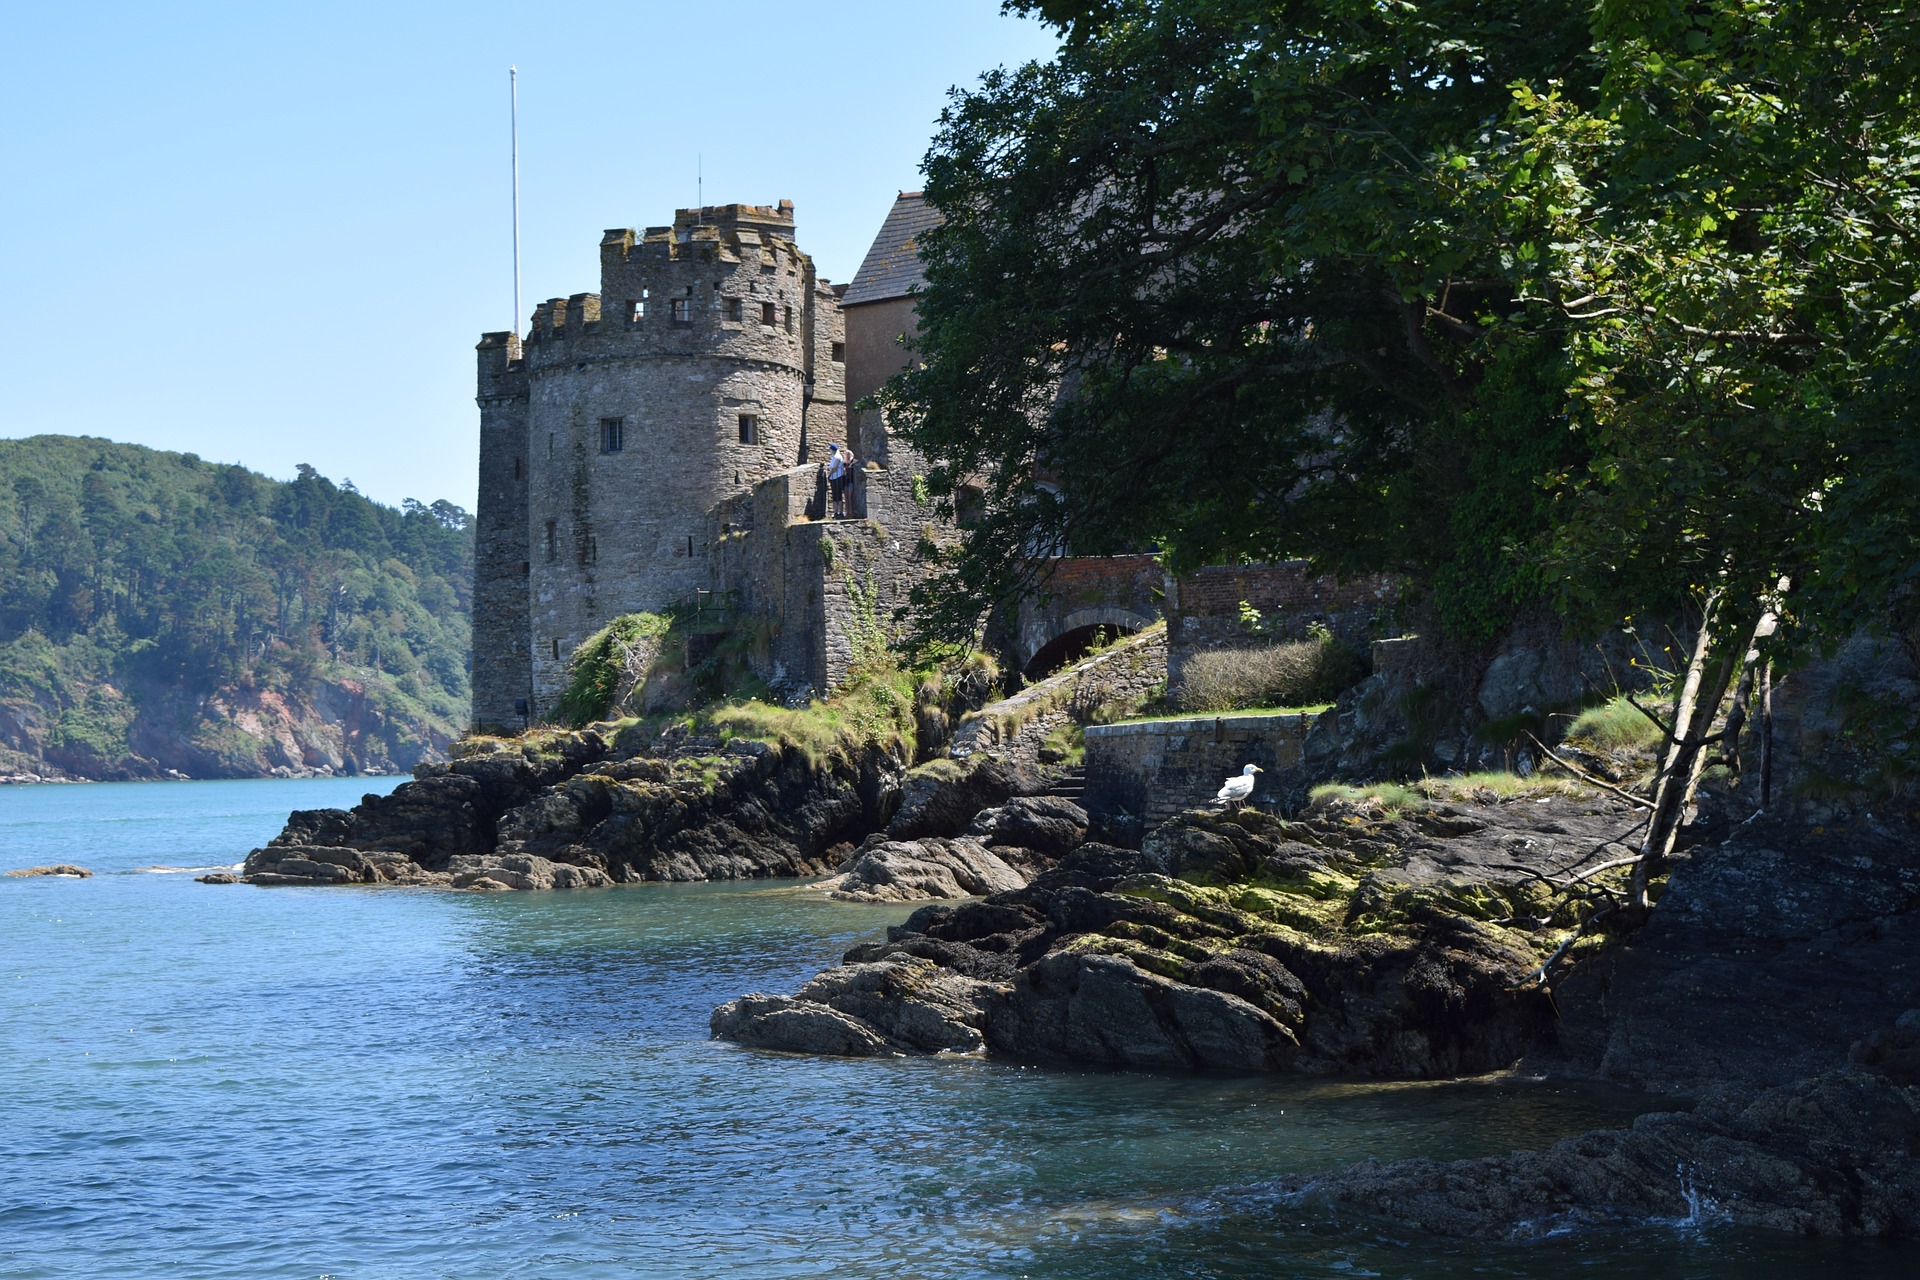 The historic Dartmouth Castle next to the waterside in Dartmouth